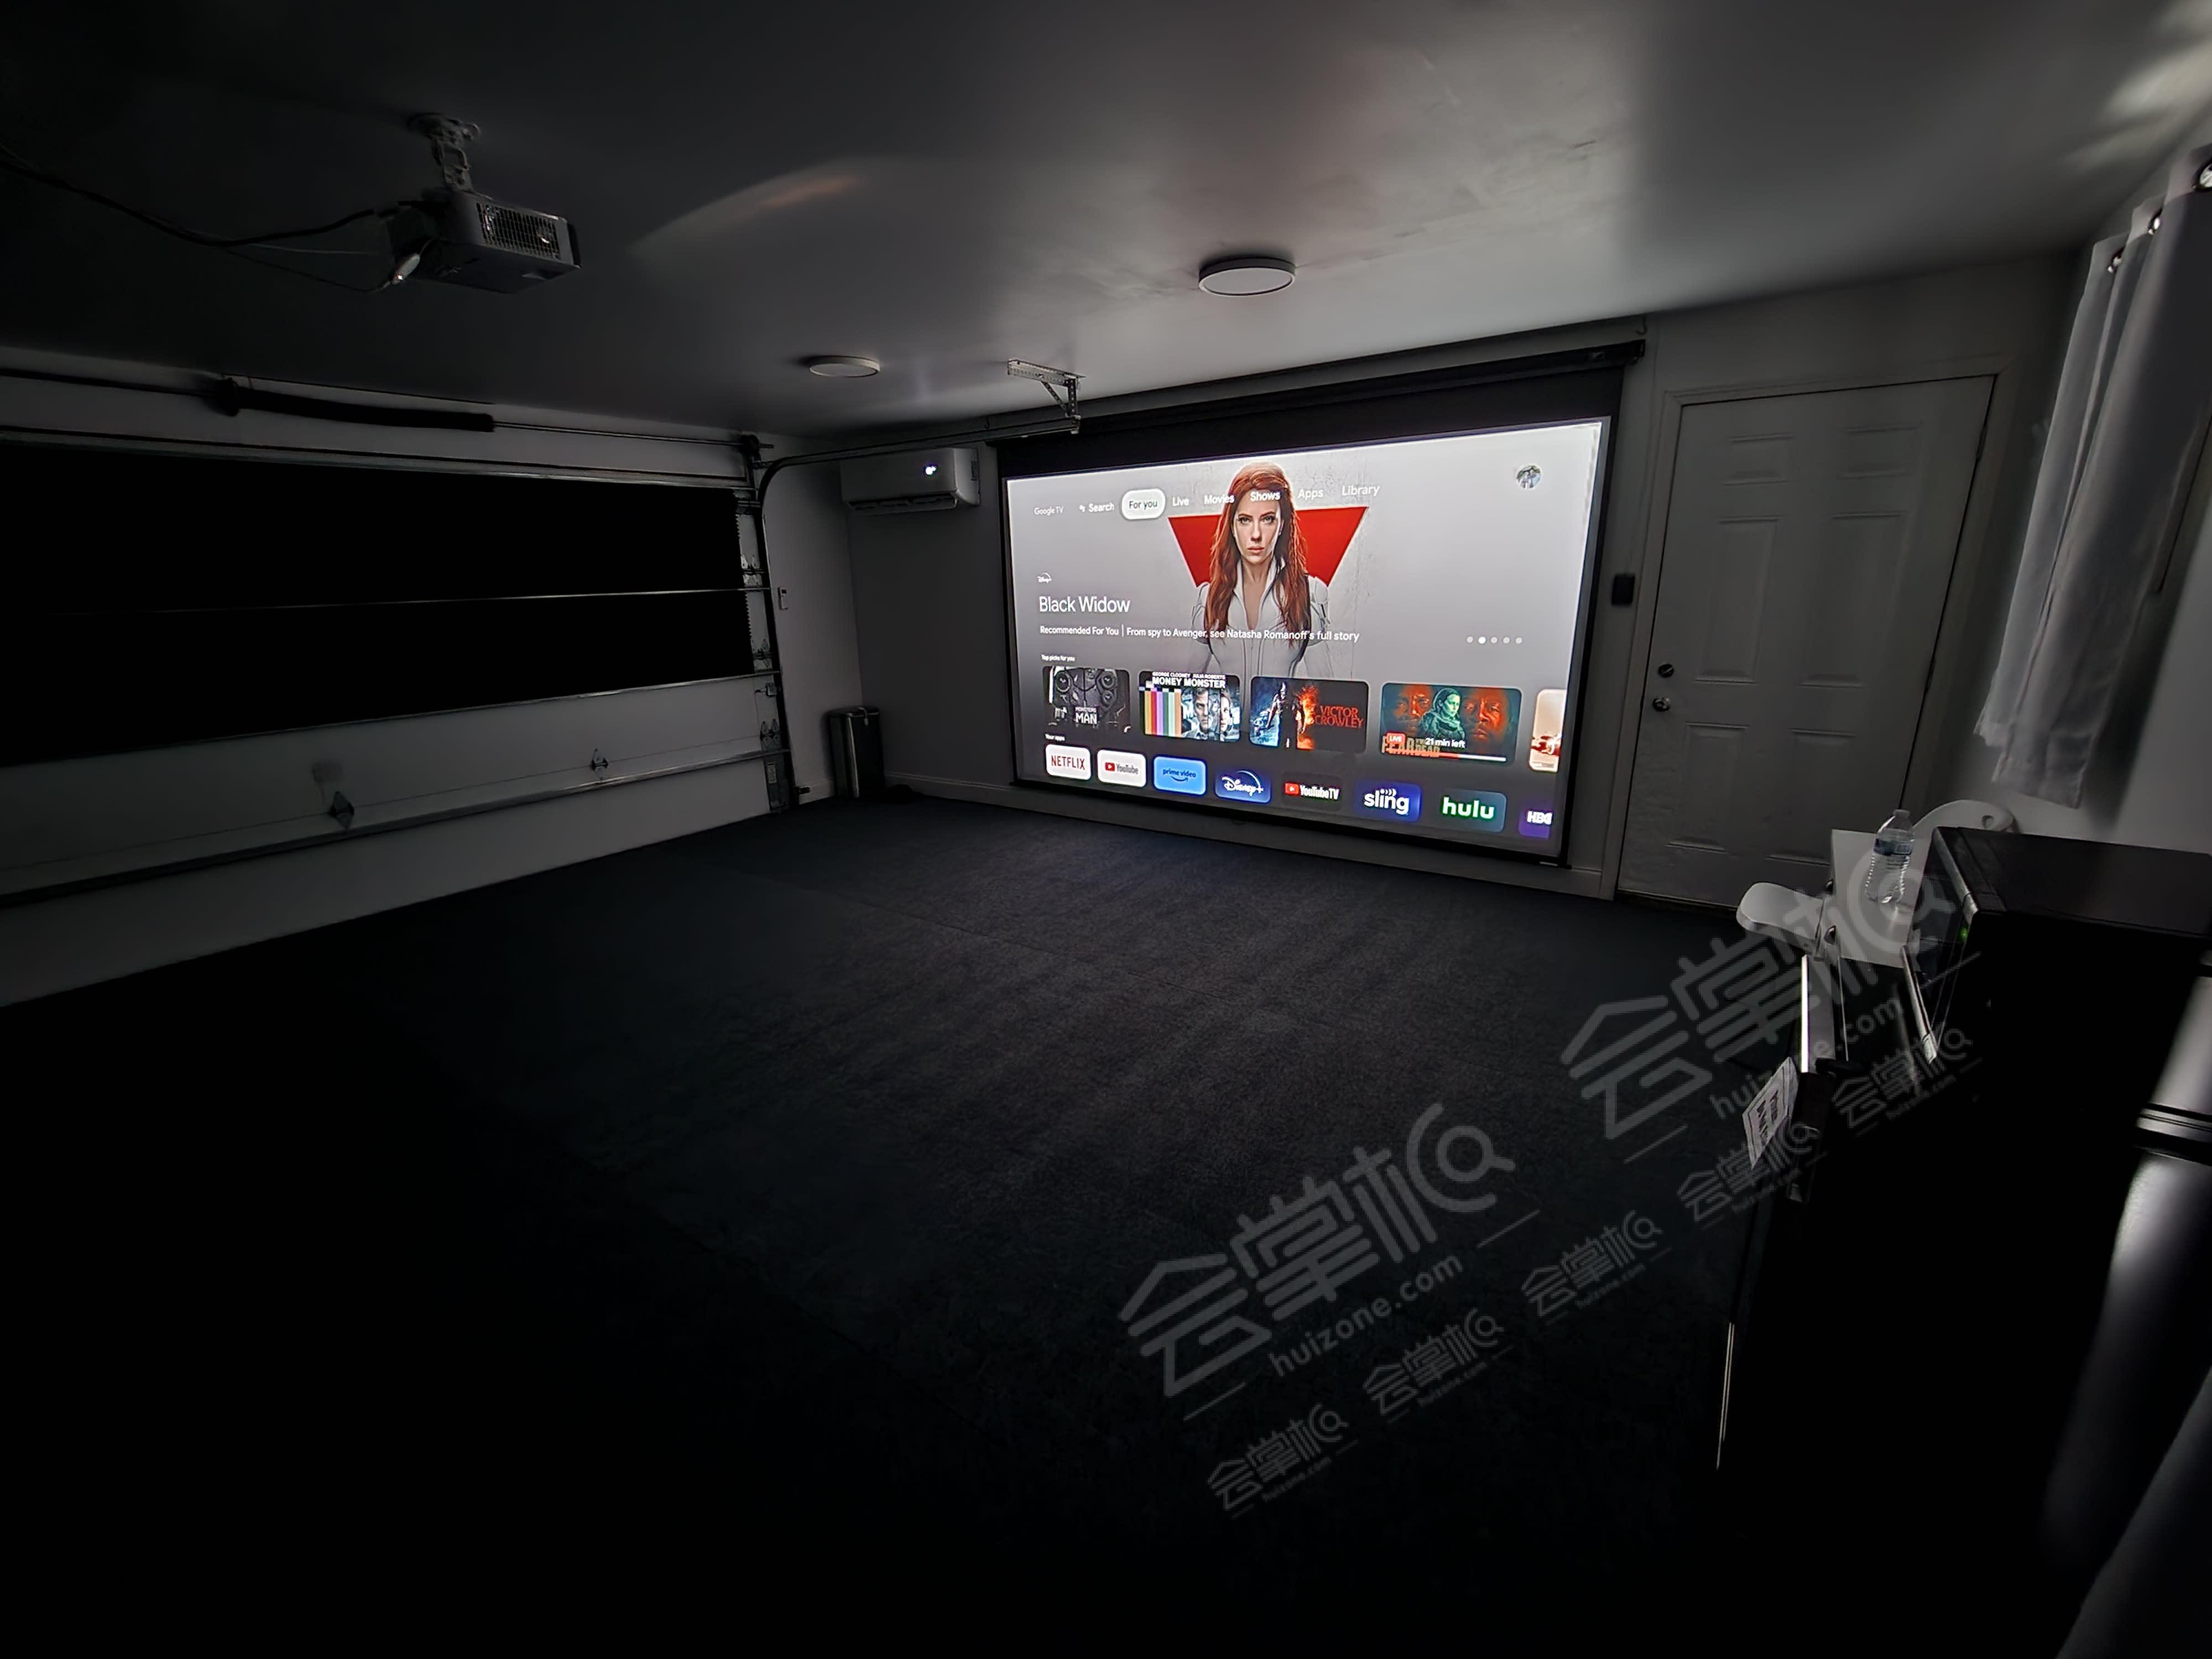 Movie Screening & Multi-Purpose Event Space Lincoln Square! Space Includes A Massive 150 inch Screen with 4K Projector!